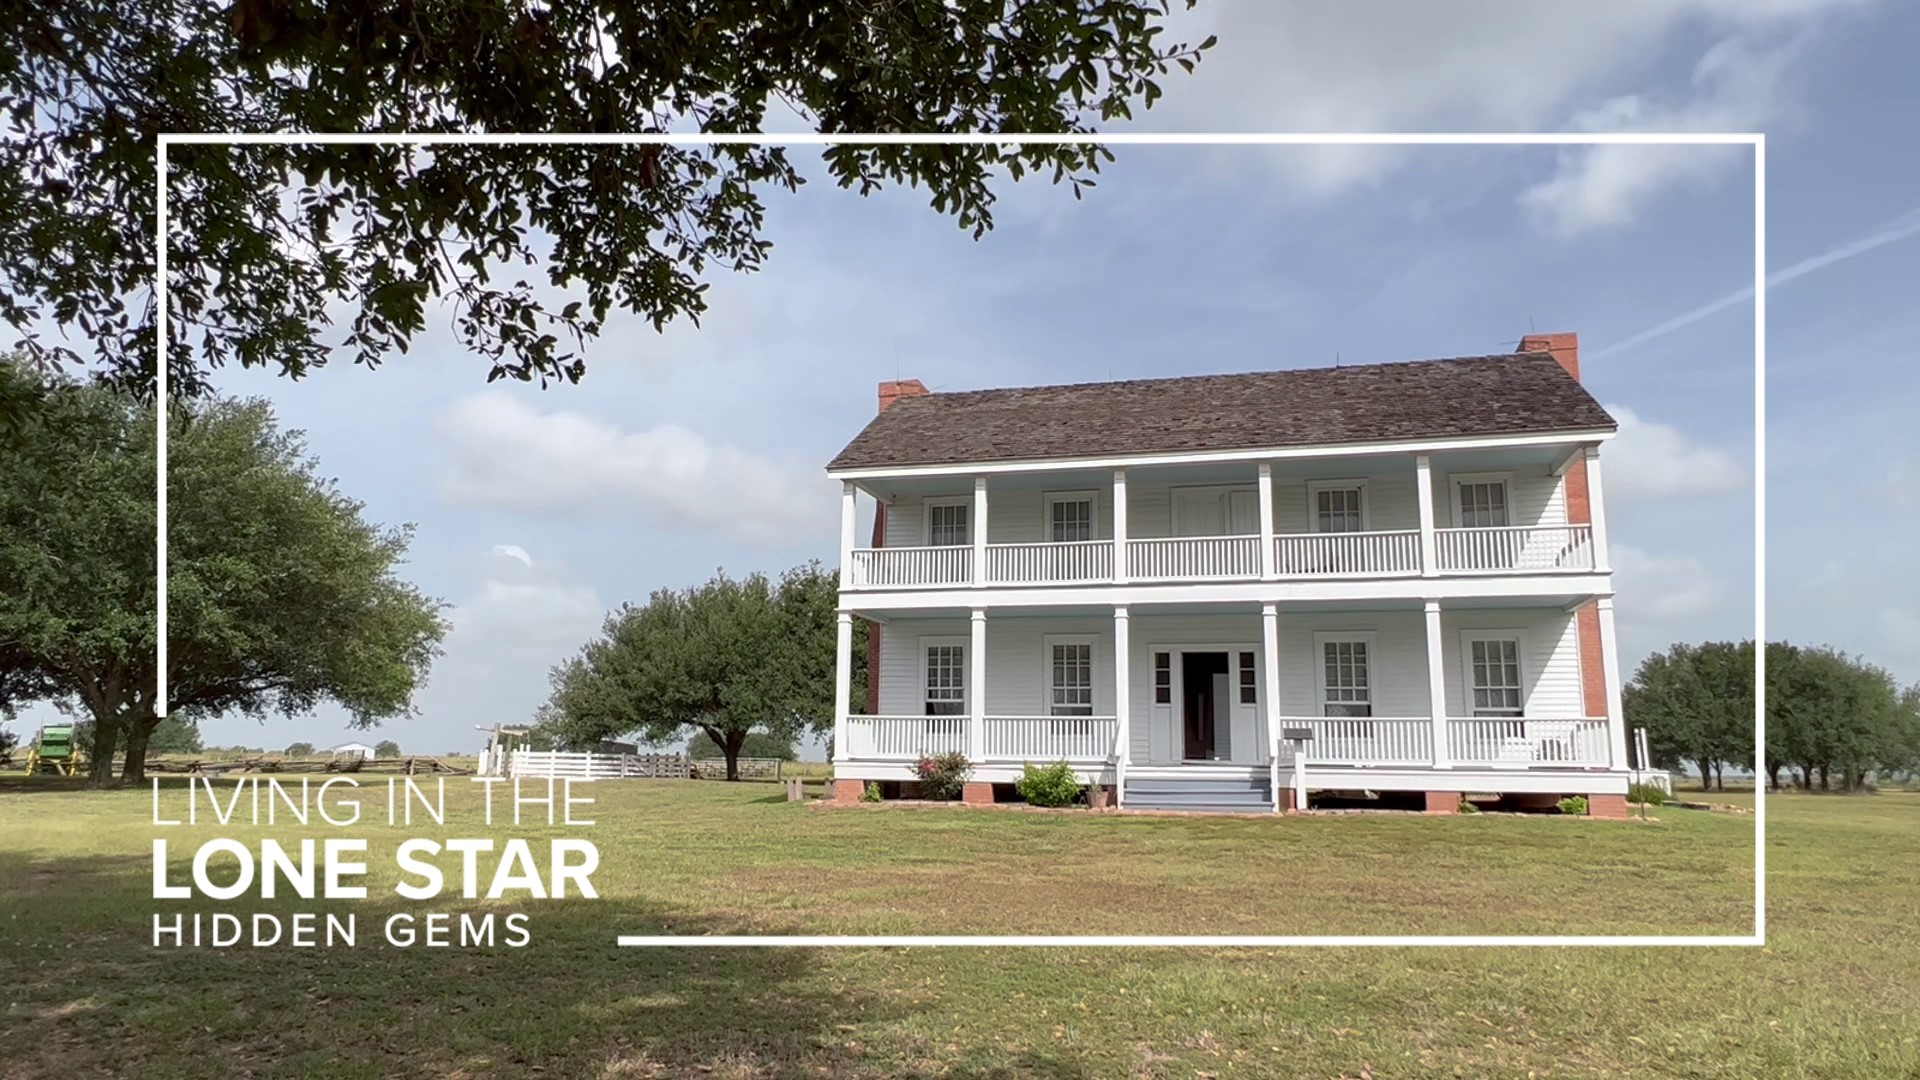 Explore Texas life in the 1860s with a walk through this homestead at the George Ranch Historical Park.